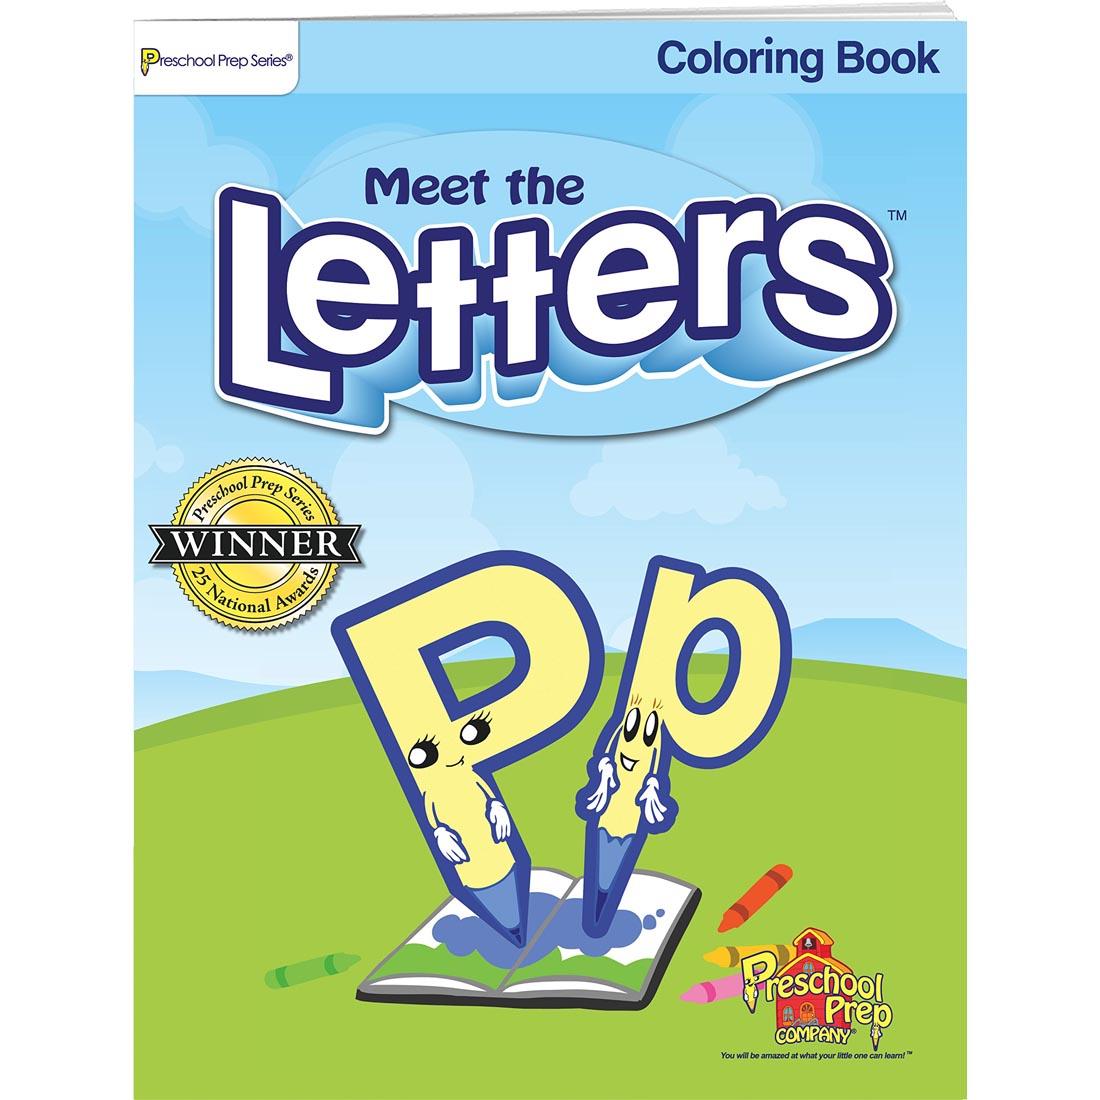 Meet The Letters Coloring Book by Preschool Prep Company